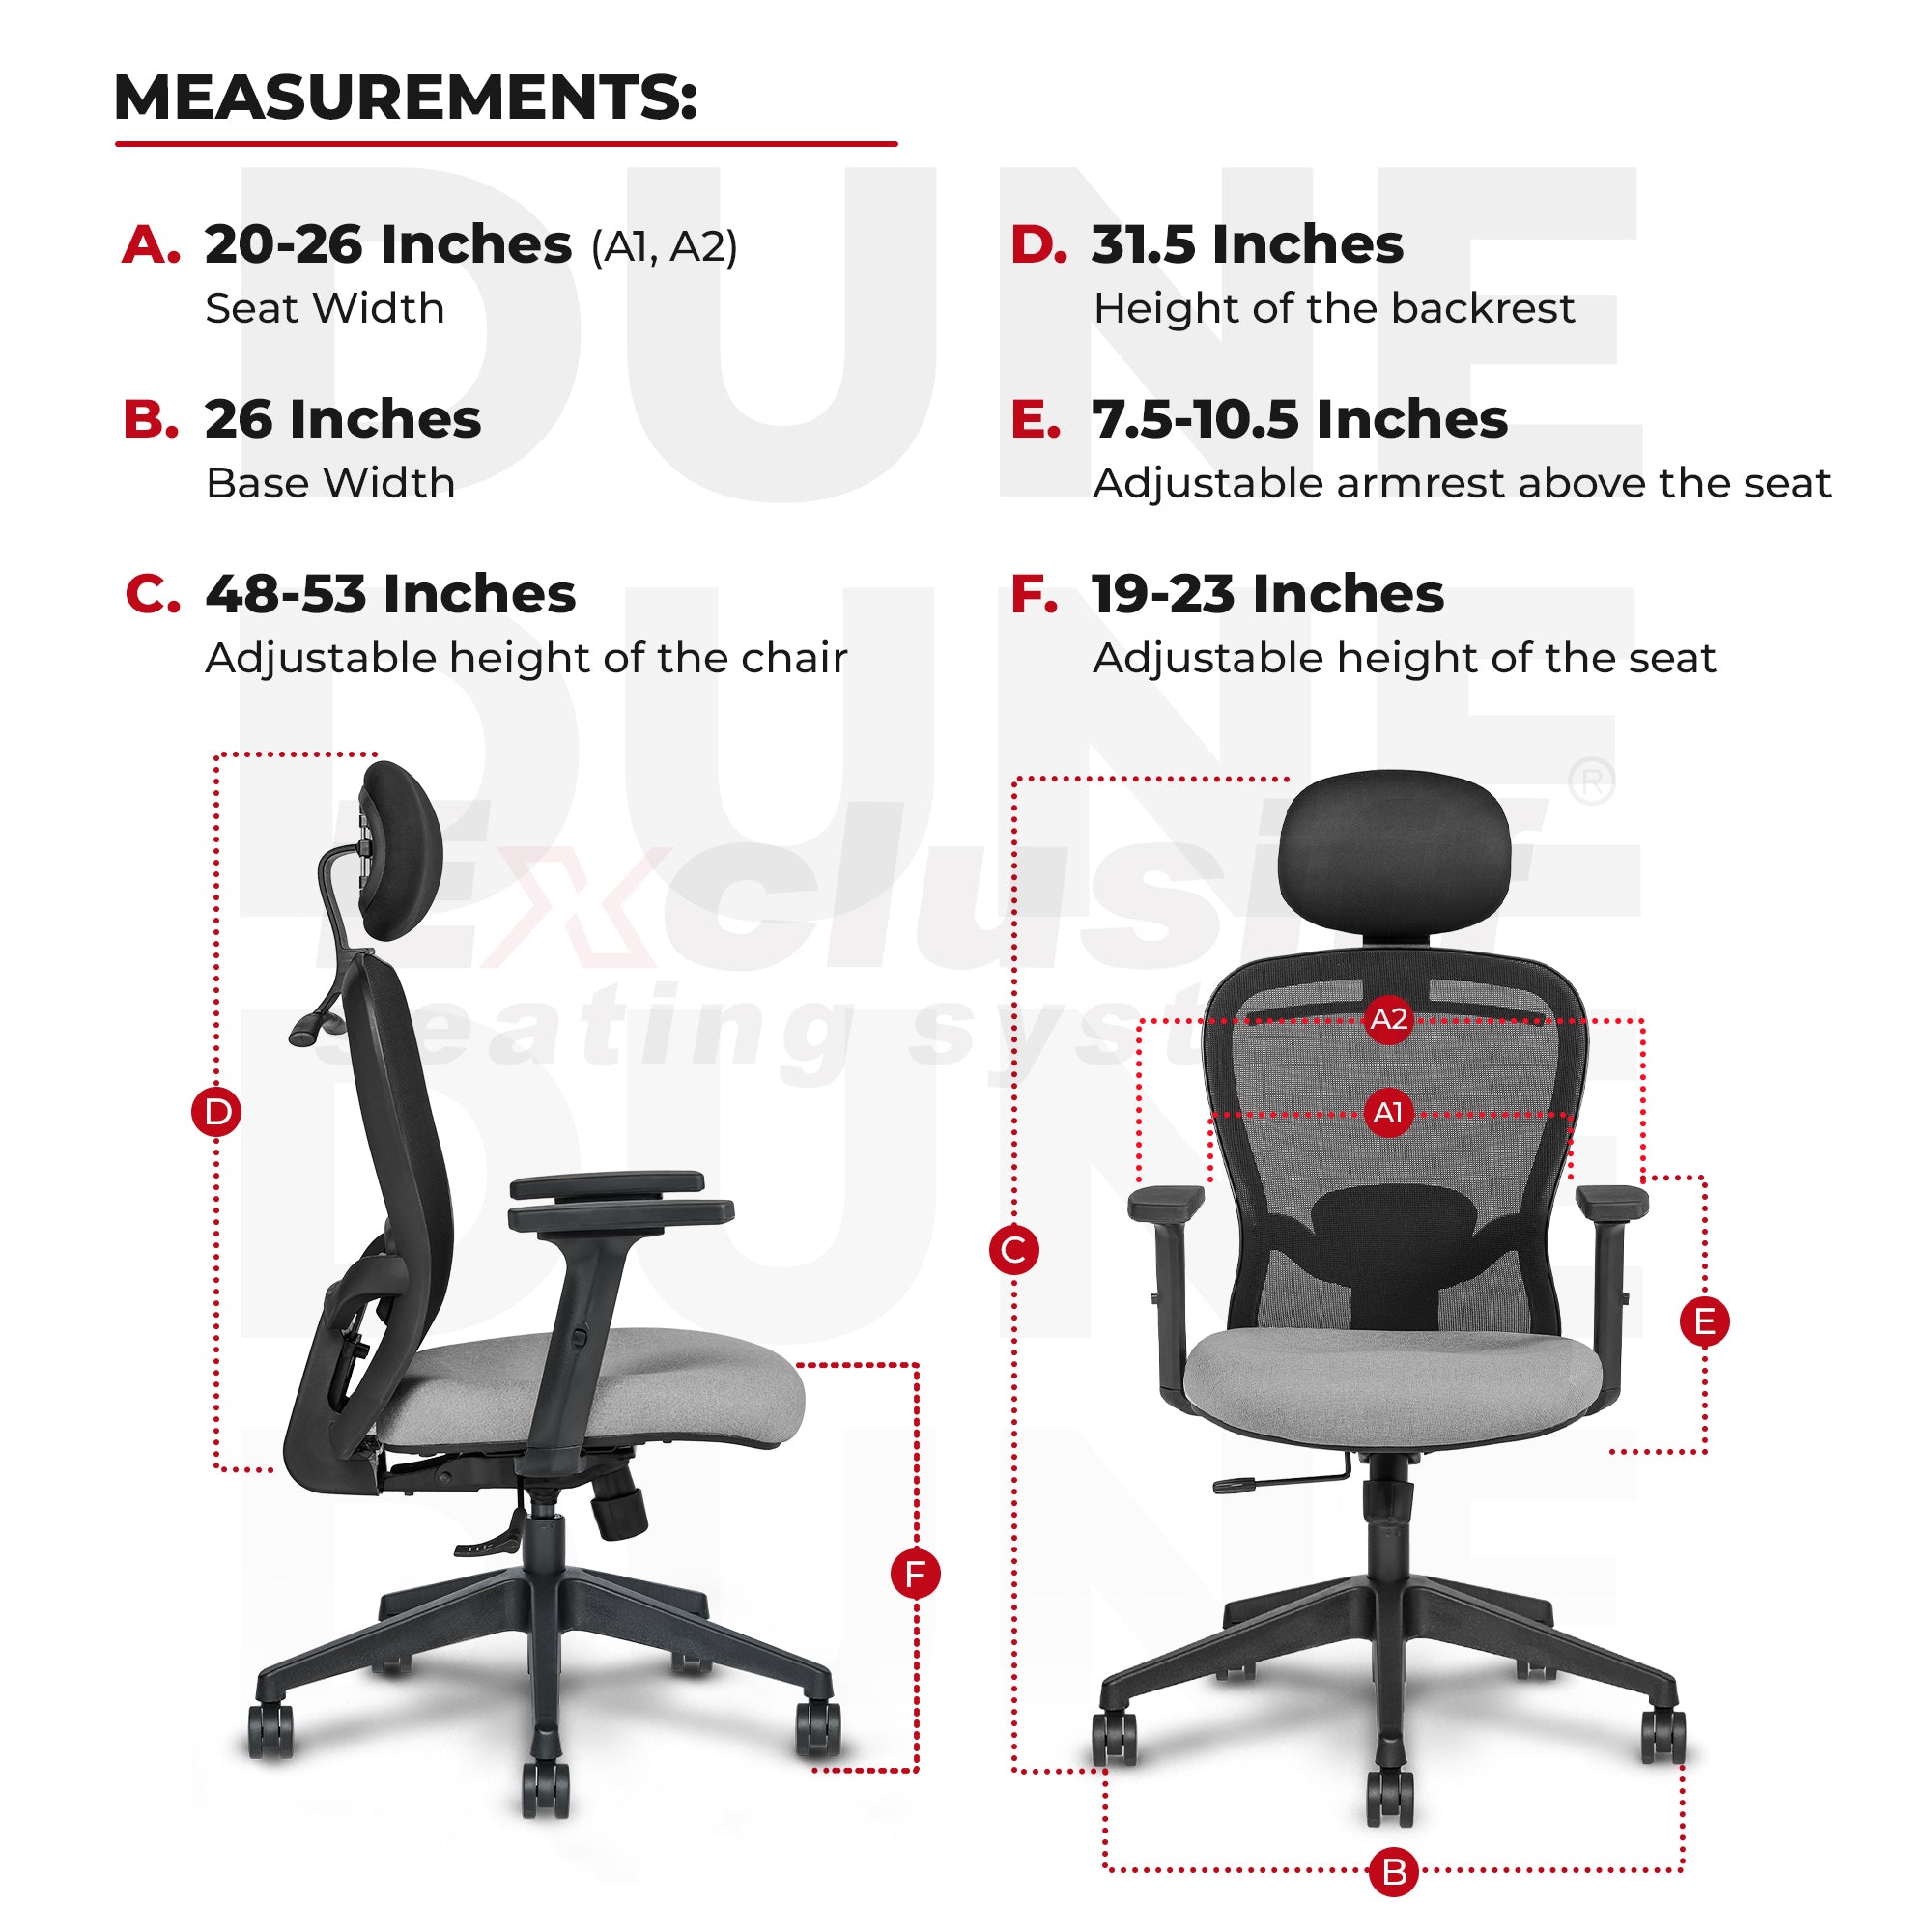 EXCLUSIFF Office Chair | 2 Years Warranty | Ergonomic Chair, Chair for Office Work at Home, Study Chair, Adjustable Height, High Back Office Chair, High Back Single Lock(Safari - Black & Grey, Nylon)